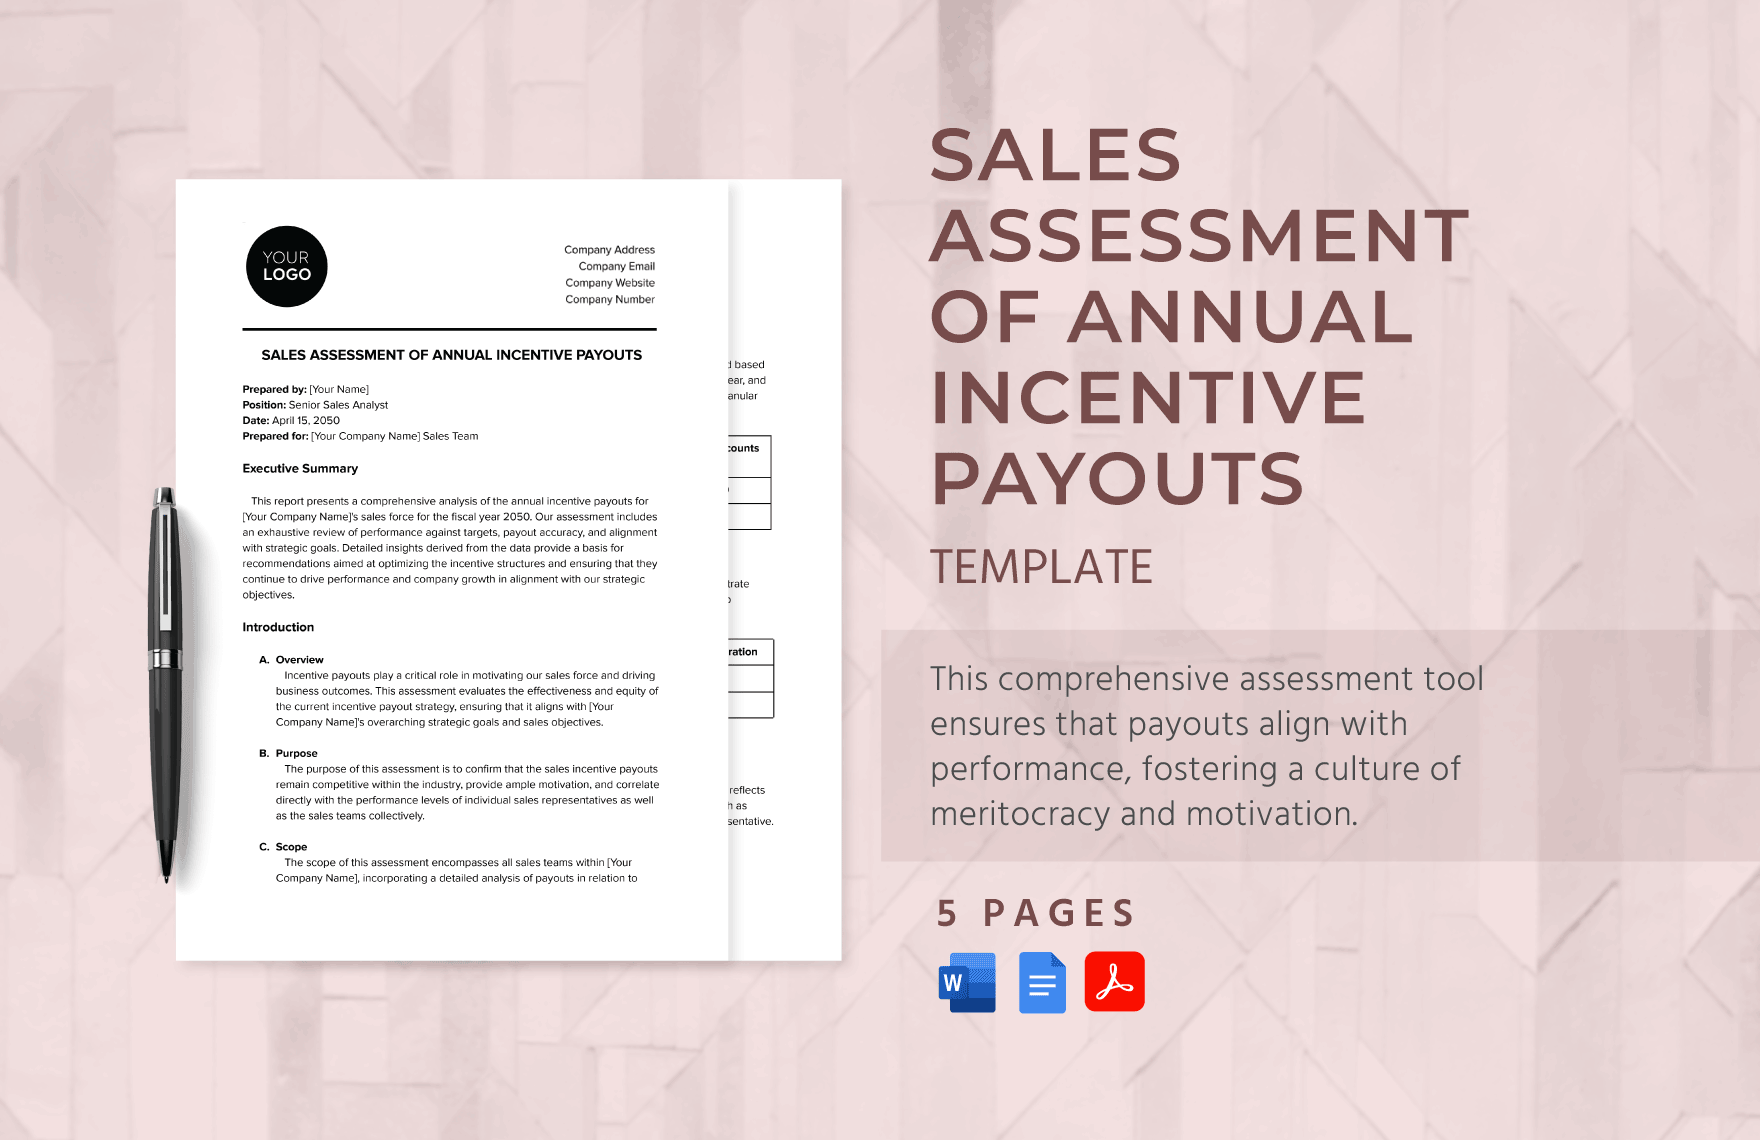 Sales Assessment of Annual Incentive Payouts Template in Word, Google Docs, PDF